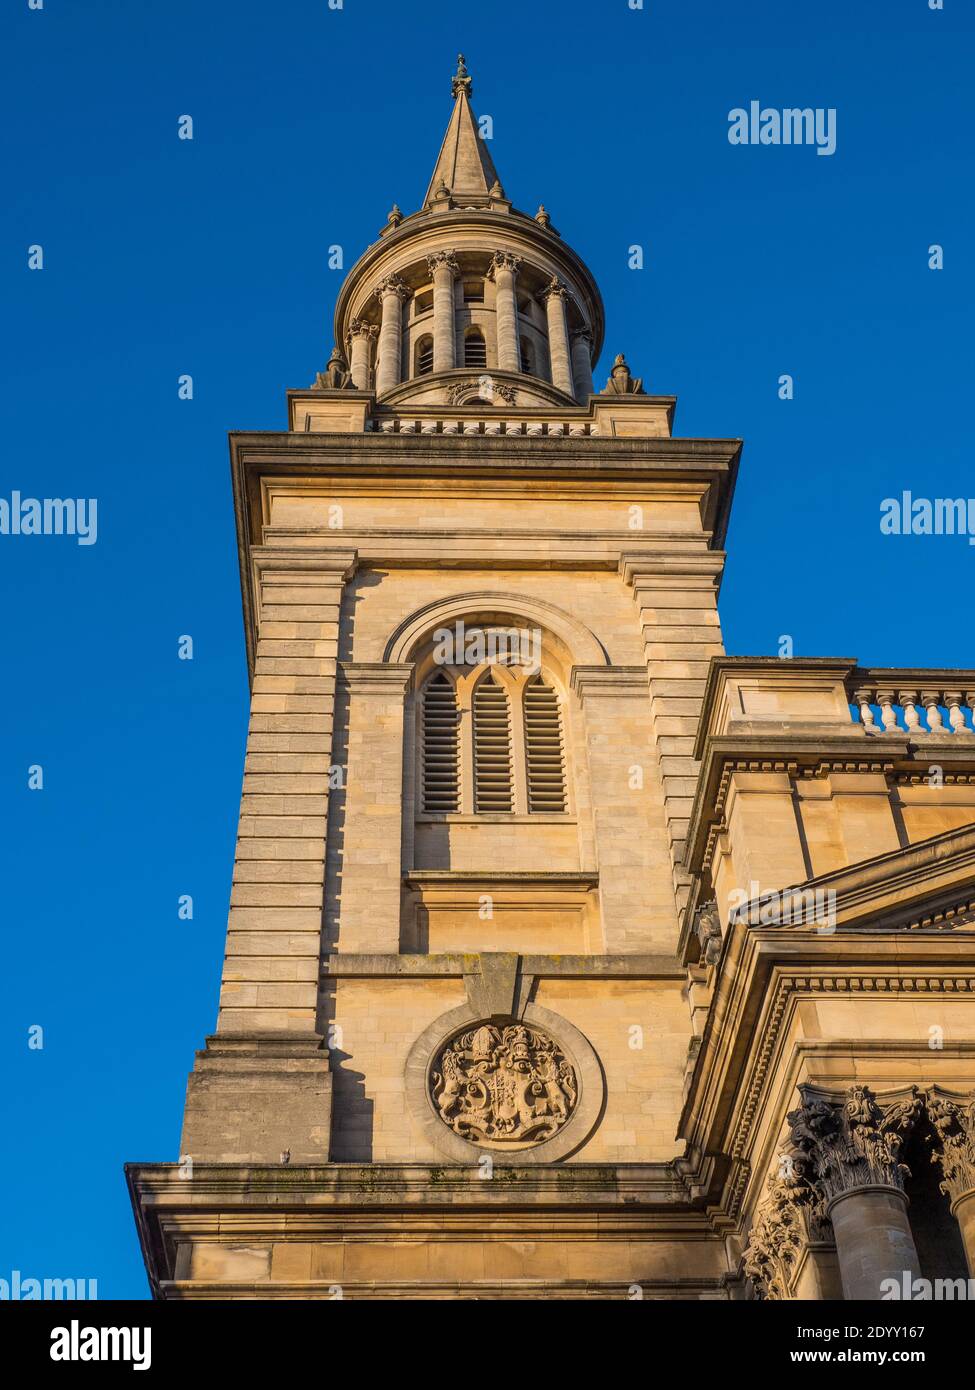 Dreaming Spires, All Saints Church, Library of Lincoln College, University of Oxford, Oxfordshire, England, UK, GB. Stock Photo